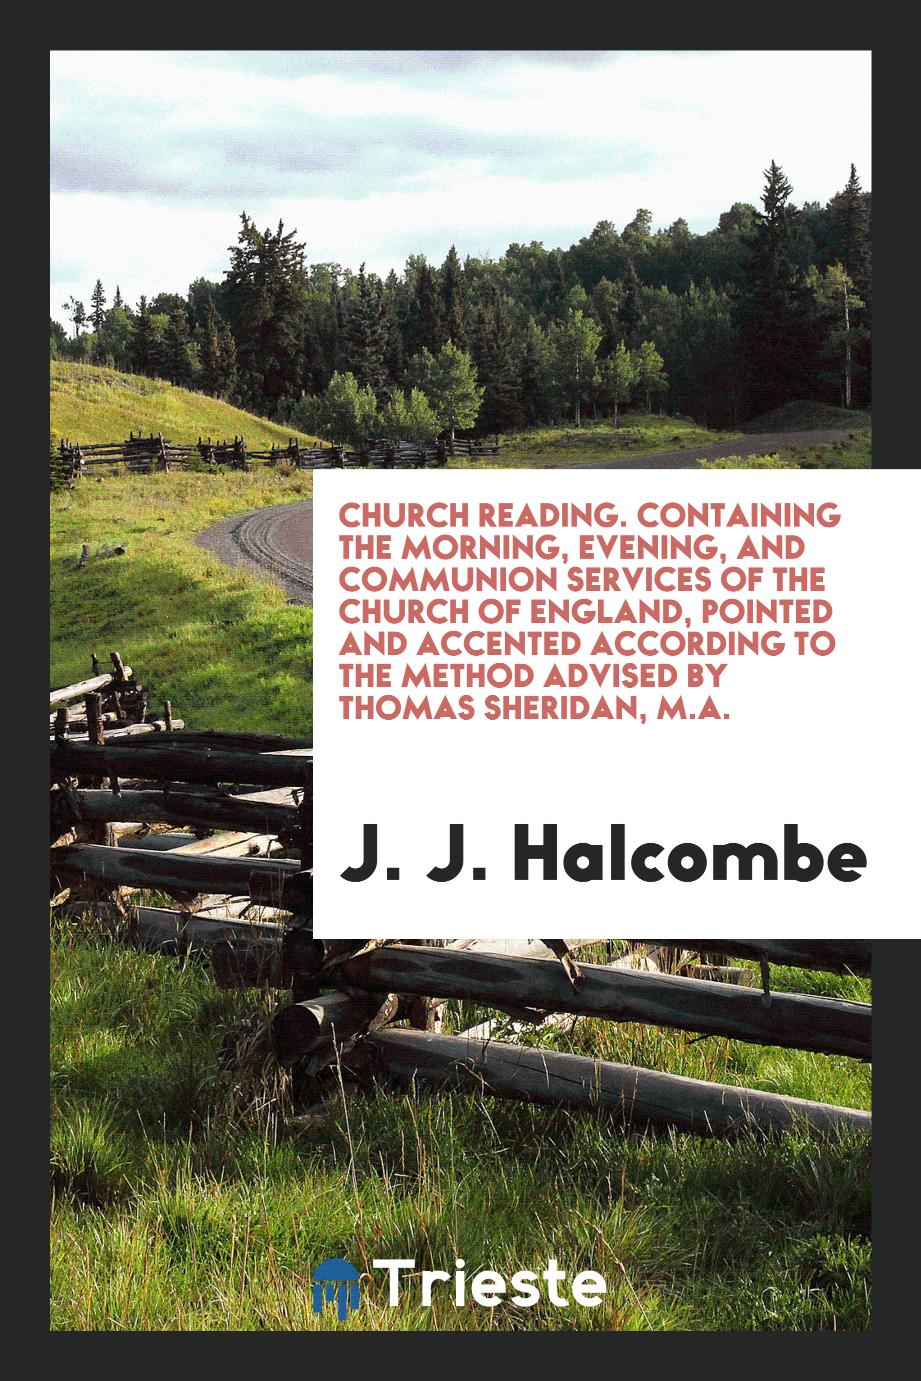 Church Reading. Containing the Morning, Evening, and Communion Services of the Church of England, Pointed and Accented According to the Method Advised by Thomas Sheridan, M.A.